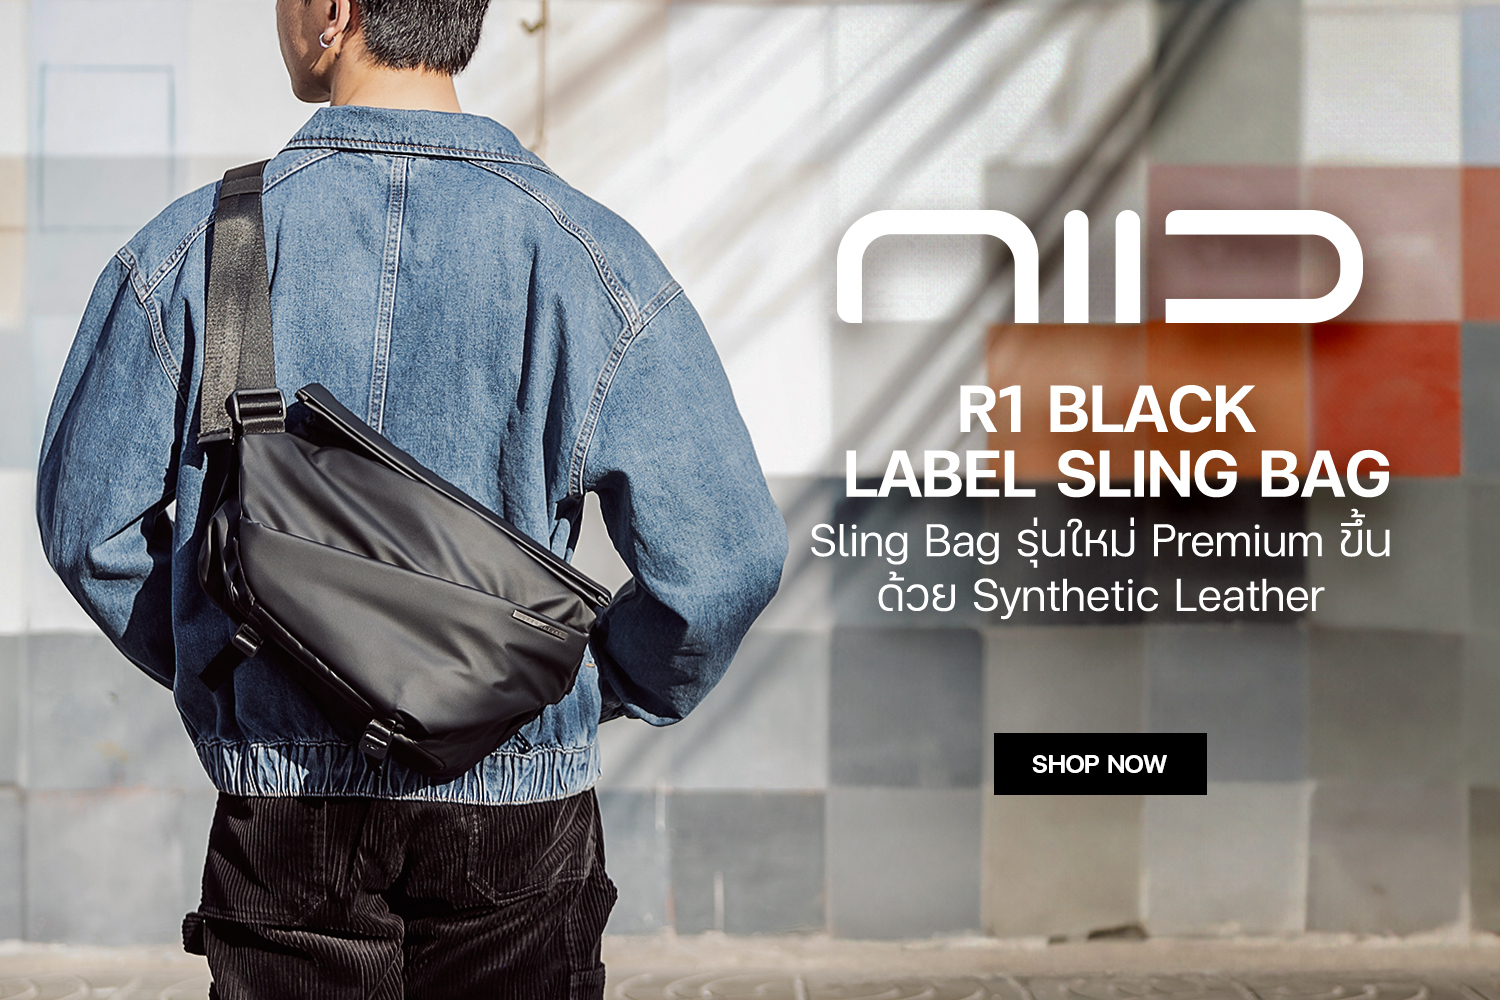 NIID official flagship store, Online Shop | Shopee Malaysia